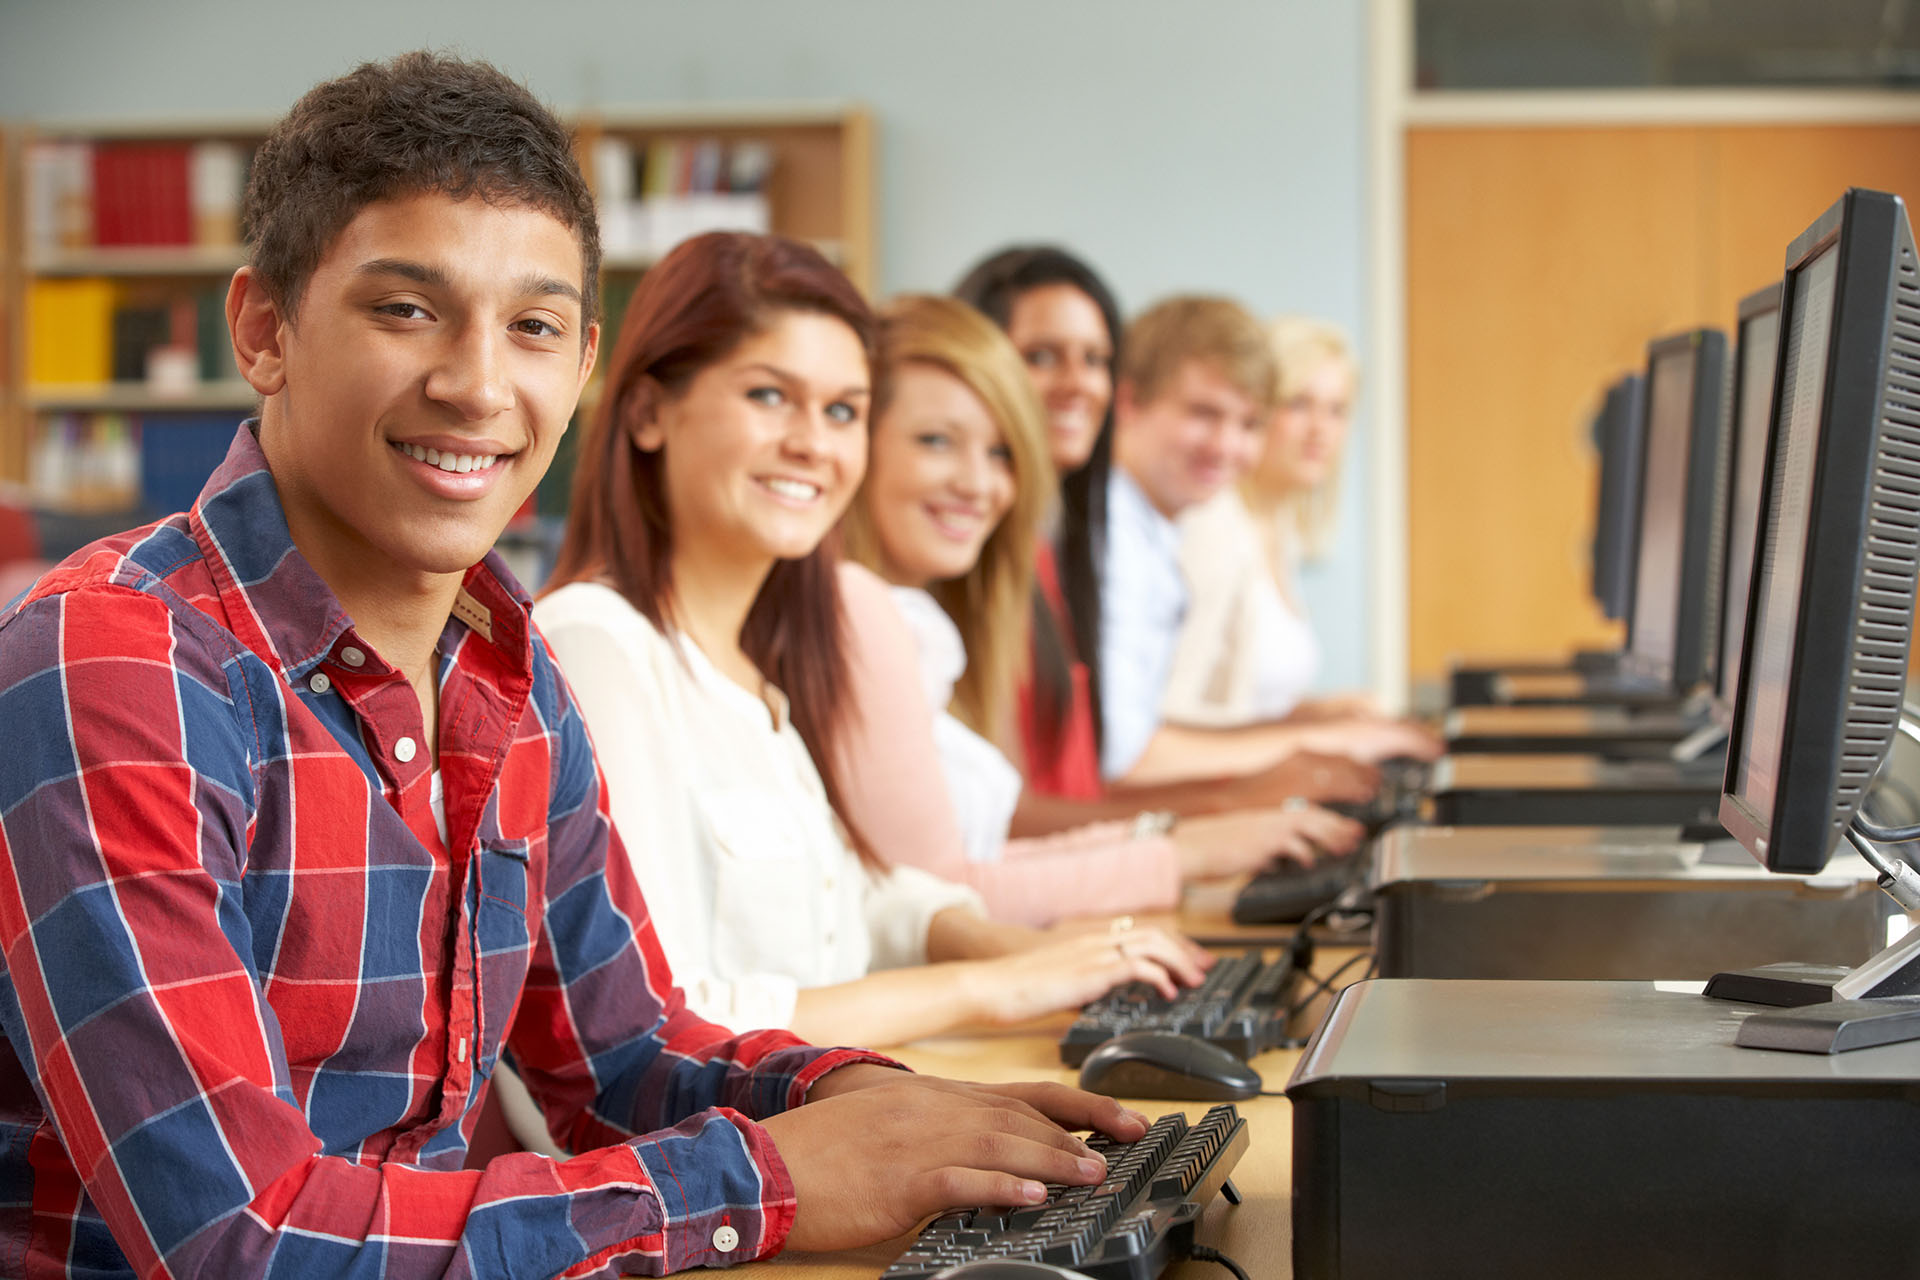 Students lined up and typing on keyboards with computer monitors.